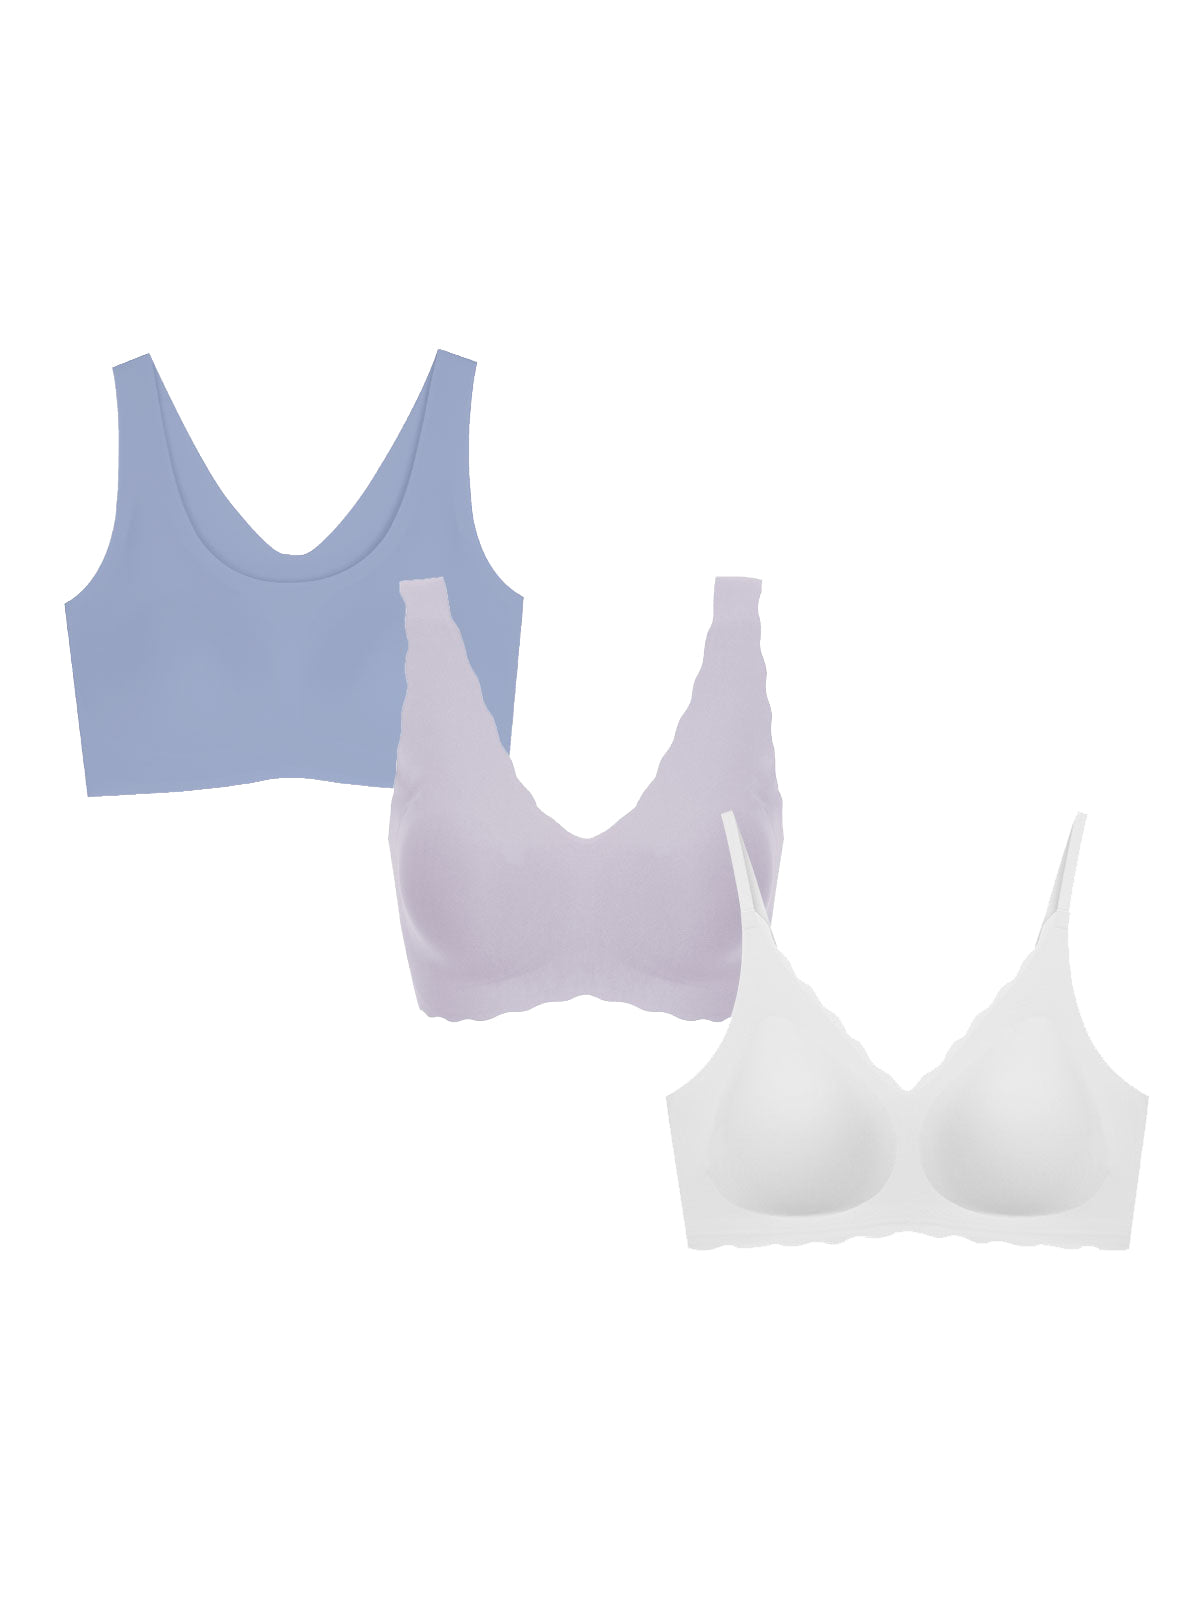 Wide Range of Bra Available To order 𝐖𝐡𝐚𝐭𝐬𝐀𝐩𝐩 𝐮𝐬 - 504